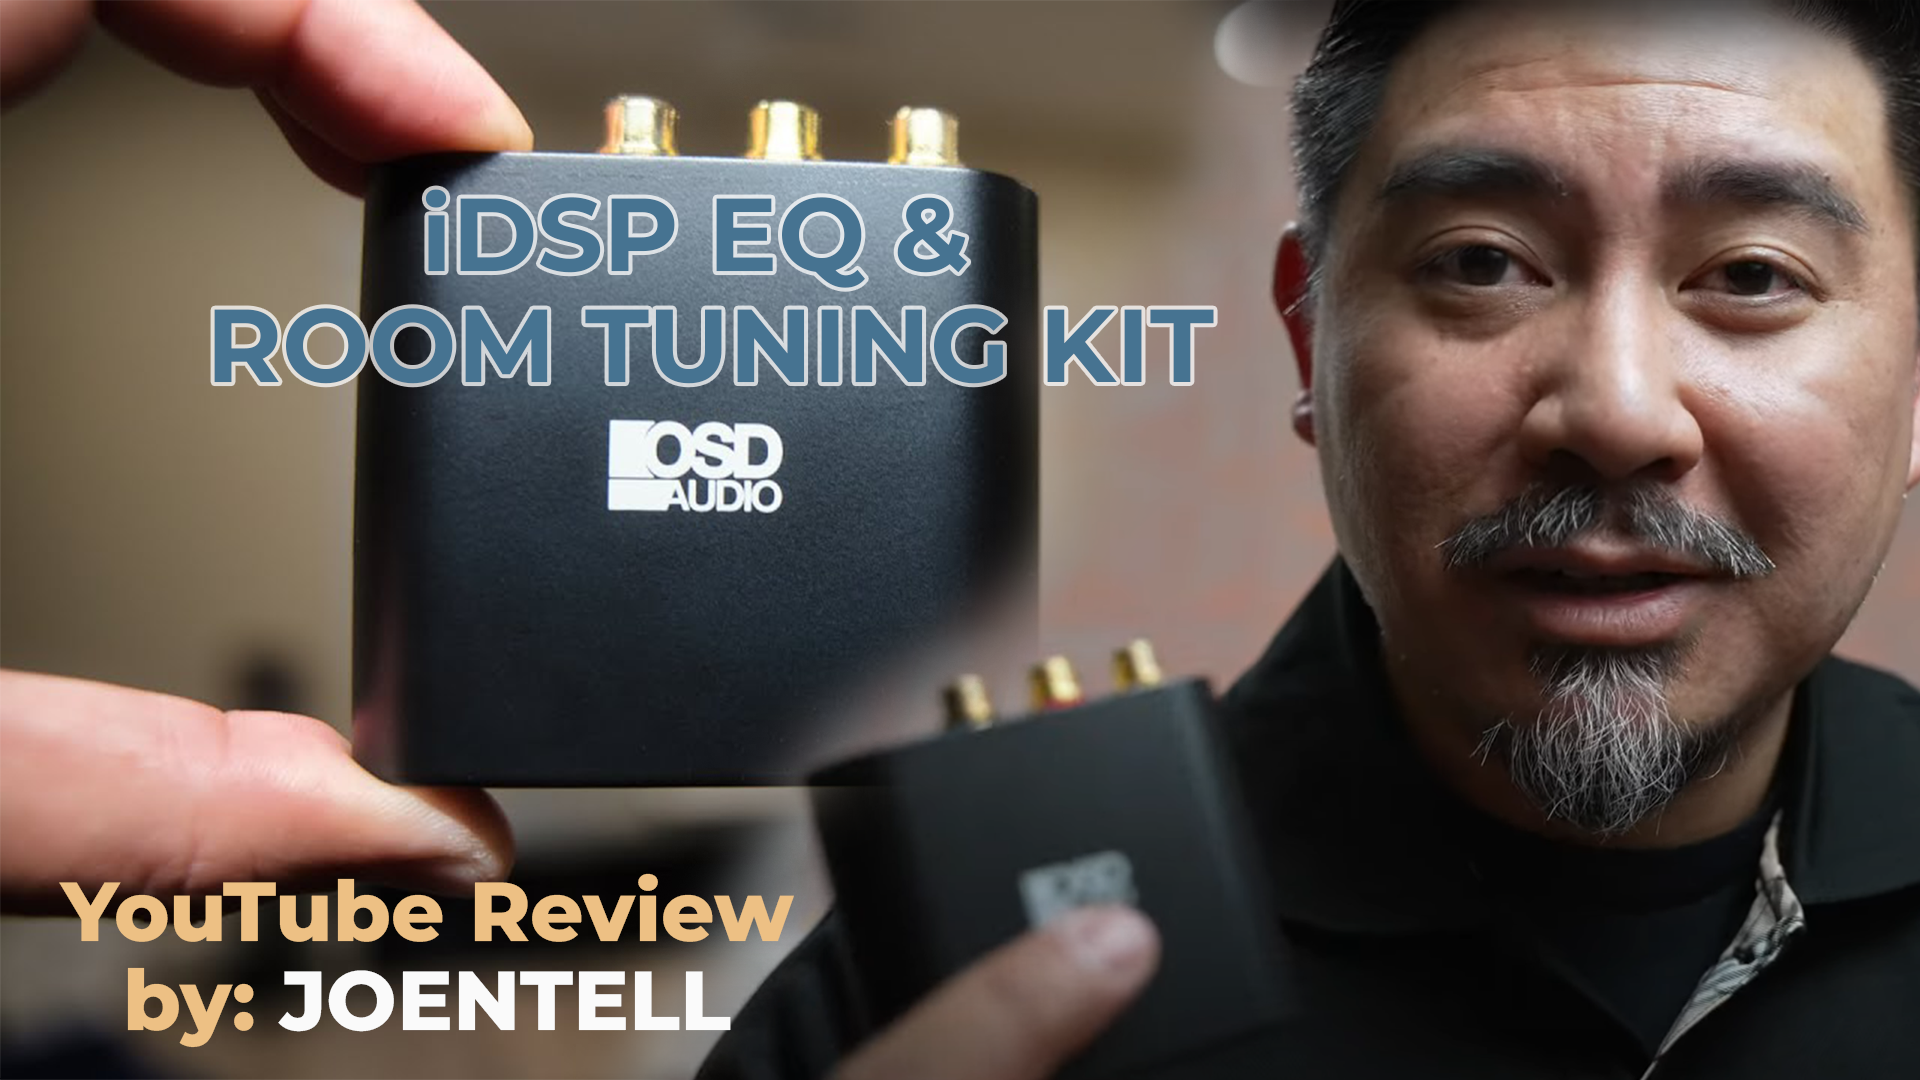 Joe N Tell Tests our NEW iDSP – EQ & Room Tuning Kit